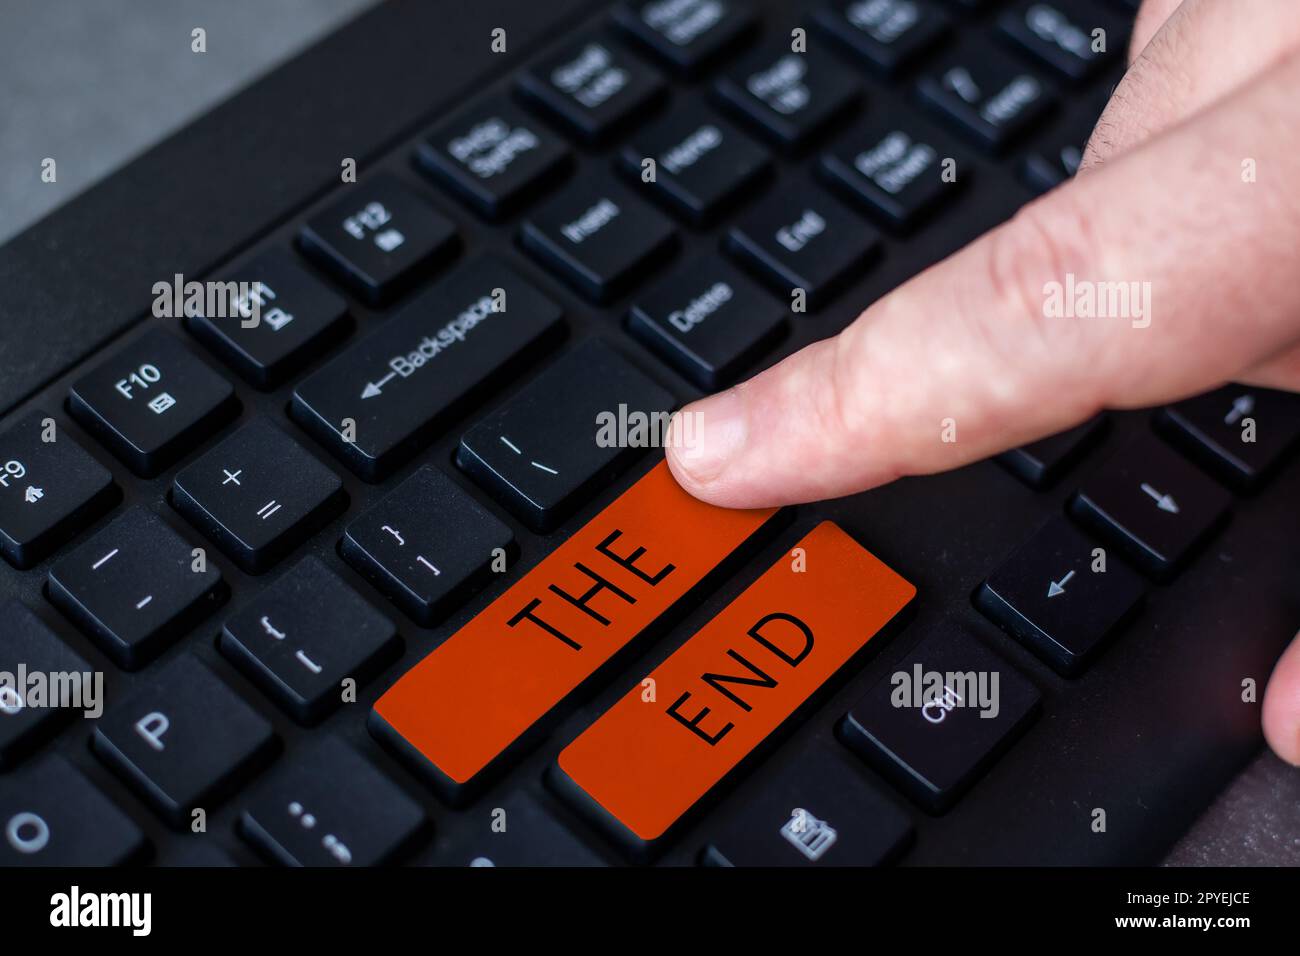 Sign displaying The End. Business overview Final part of play relationship event movie act Finish Conclusion Stock Photo